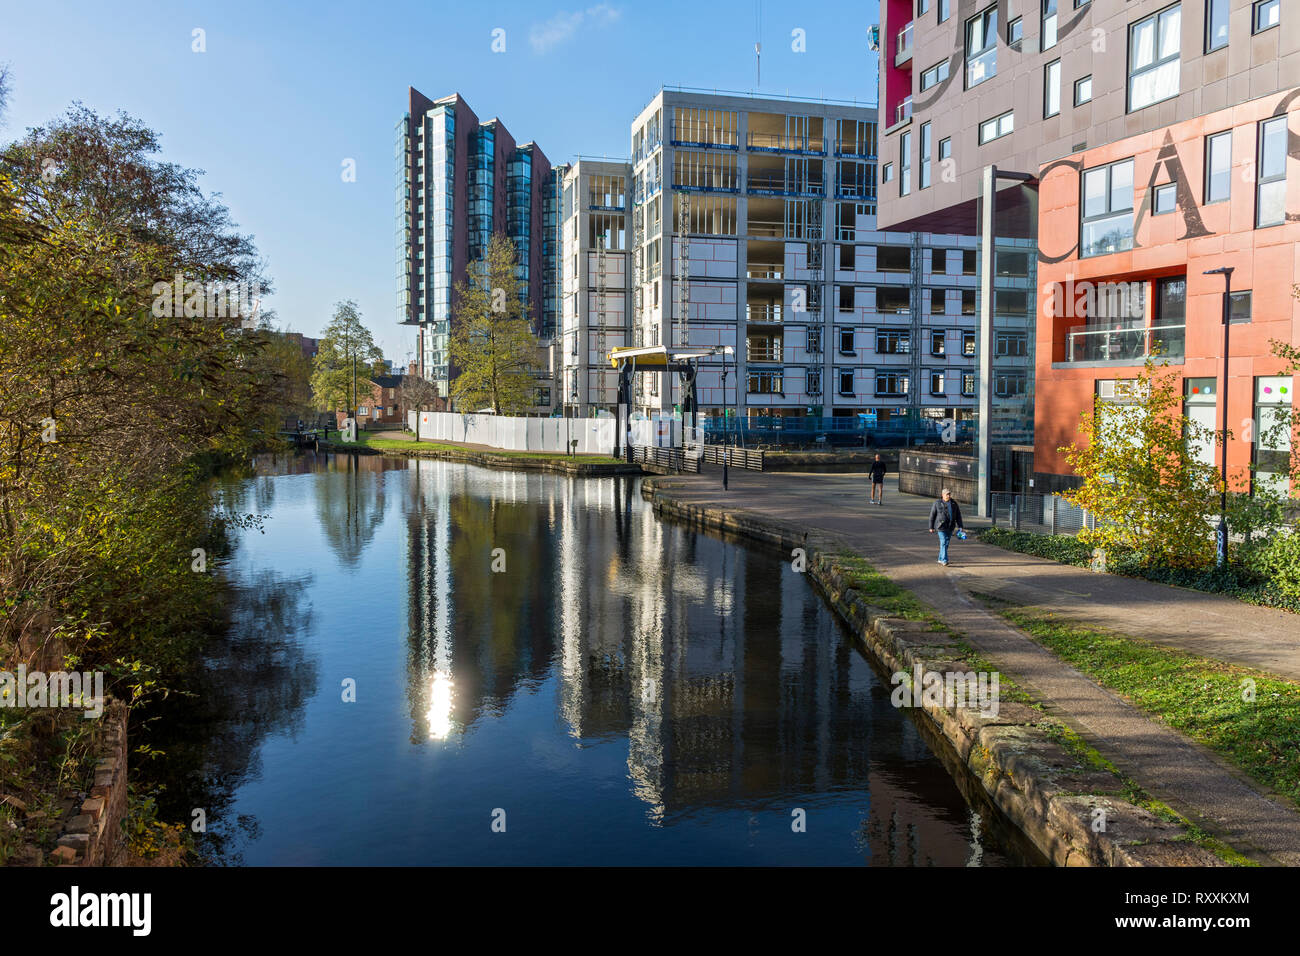 The Islington Wharf, One Vesta Street (under construction) and Chips apartments blocks from the Ashton Canal, Ancoats, Manchester, England, UK Stock Photo